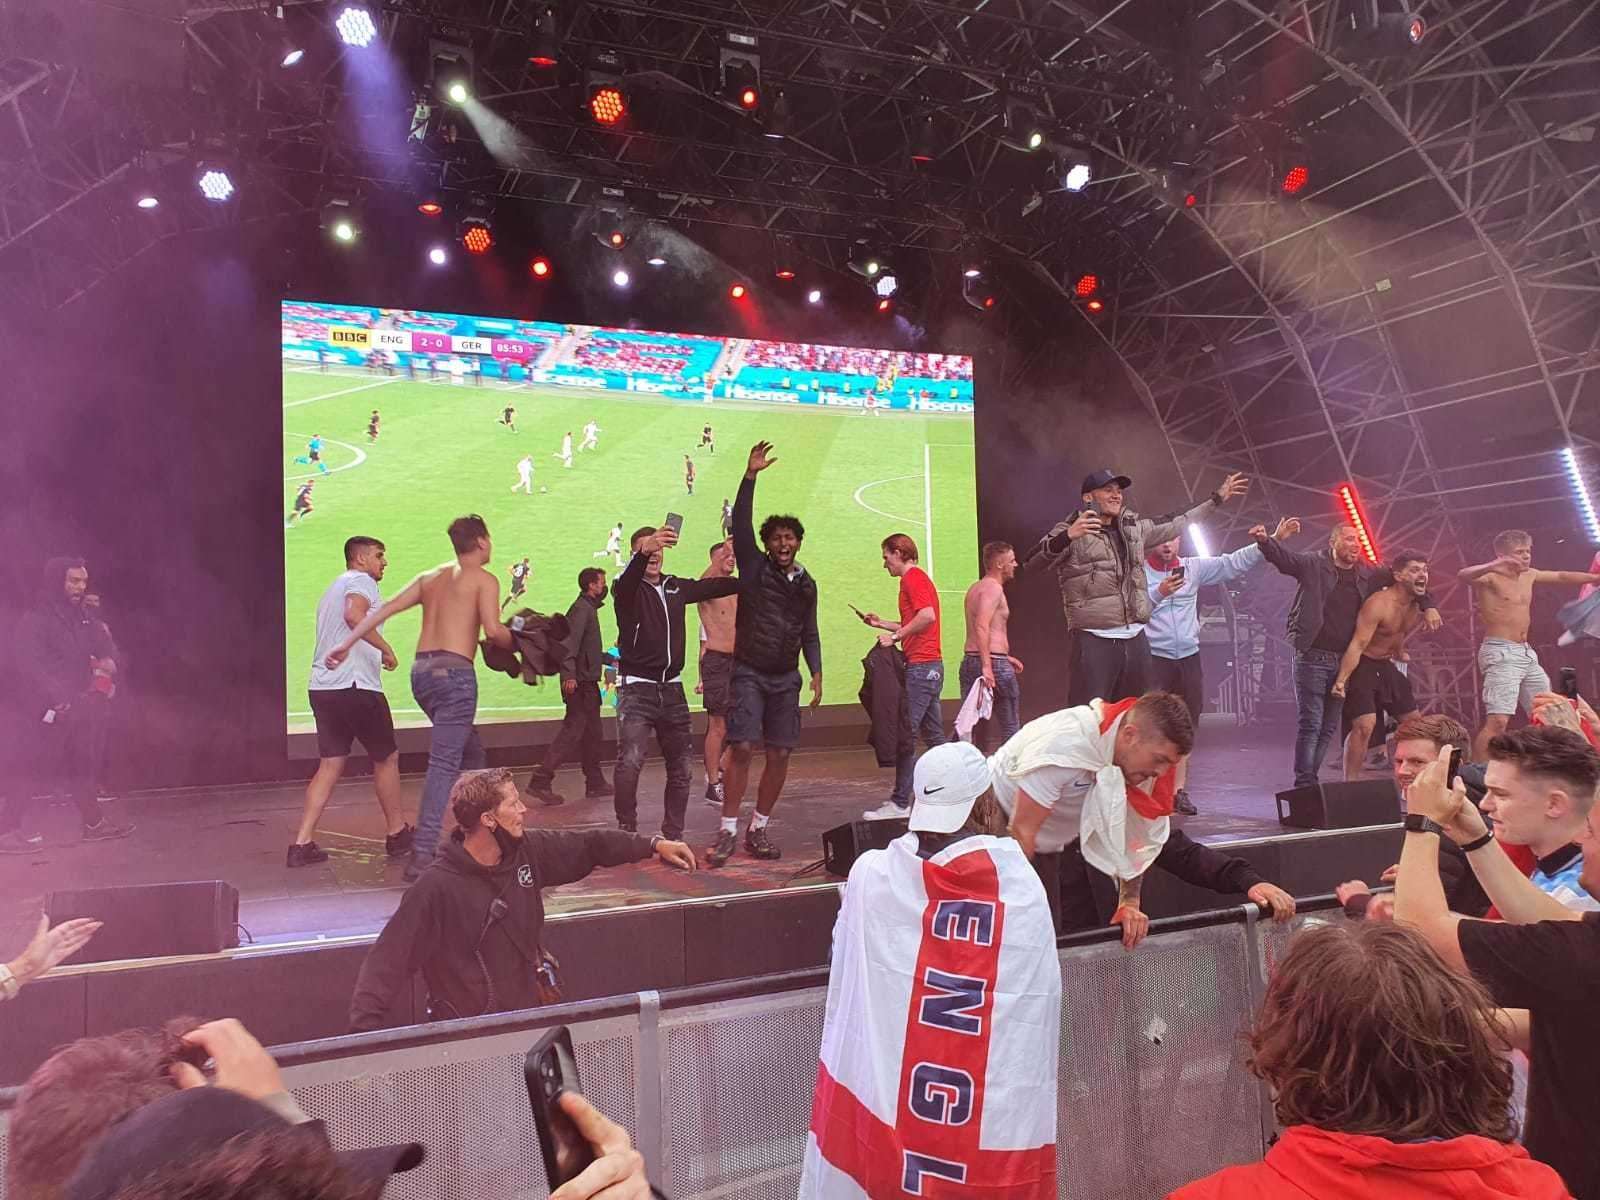 Fans climbed railings to get on the stage after England doubled their lead against Germany